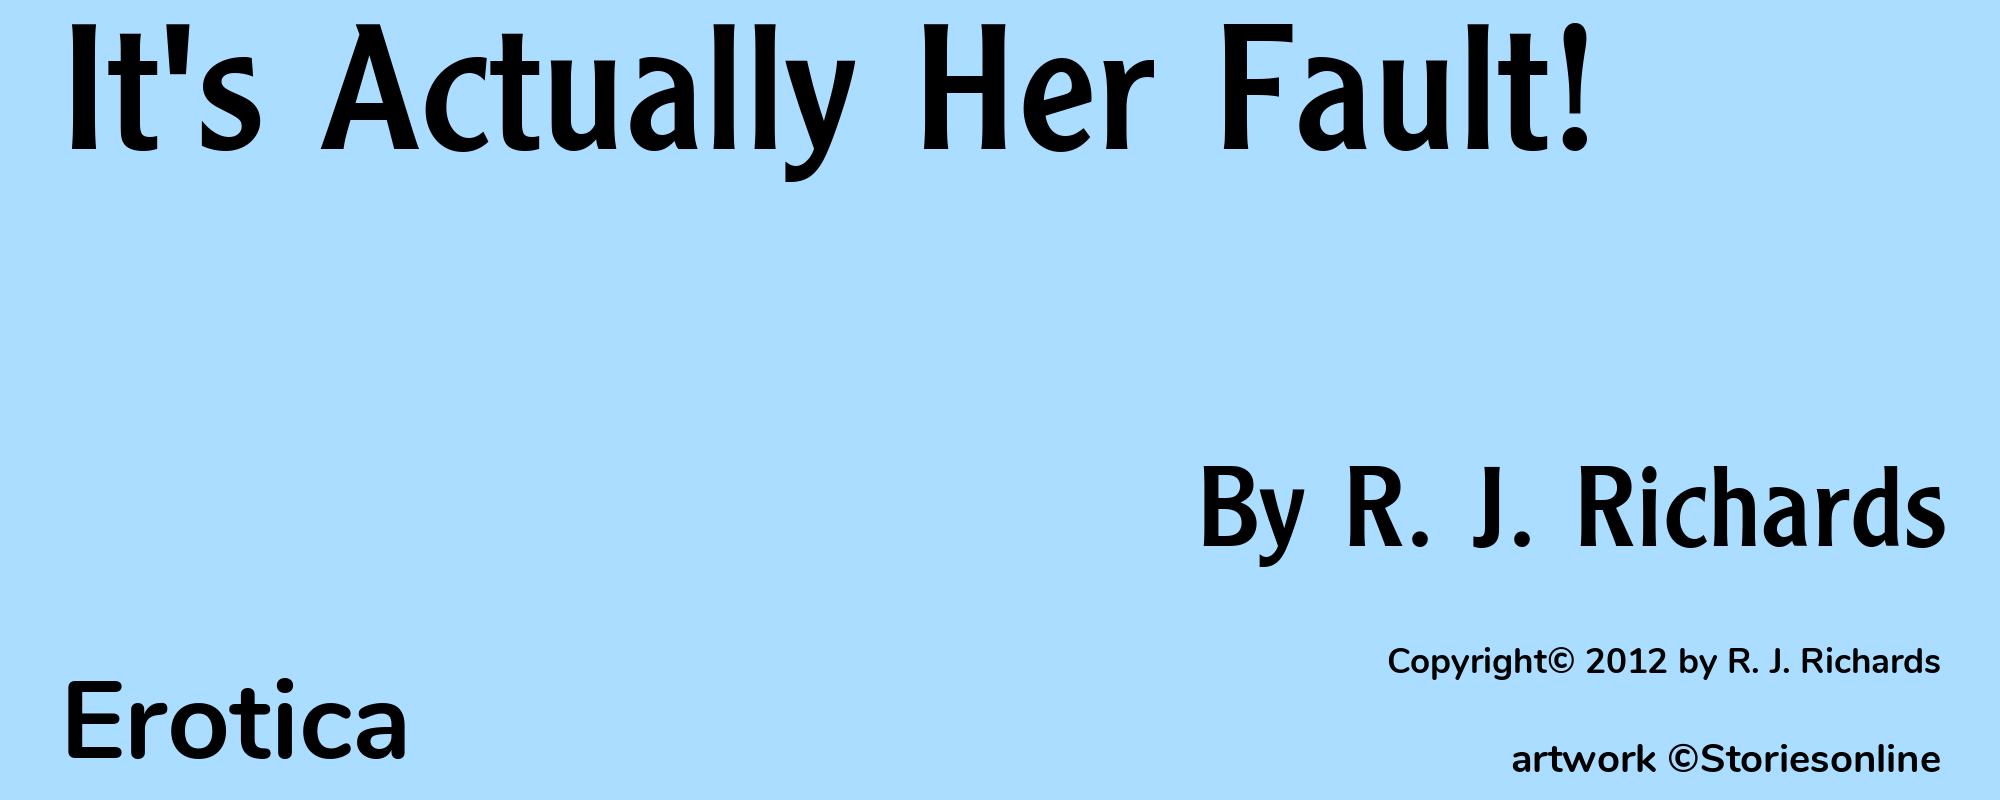 It's Actually Her Fault! - Cover